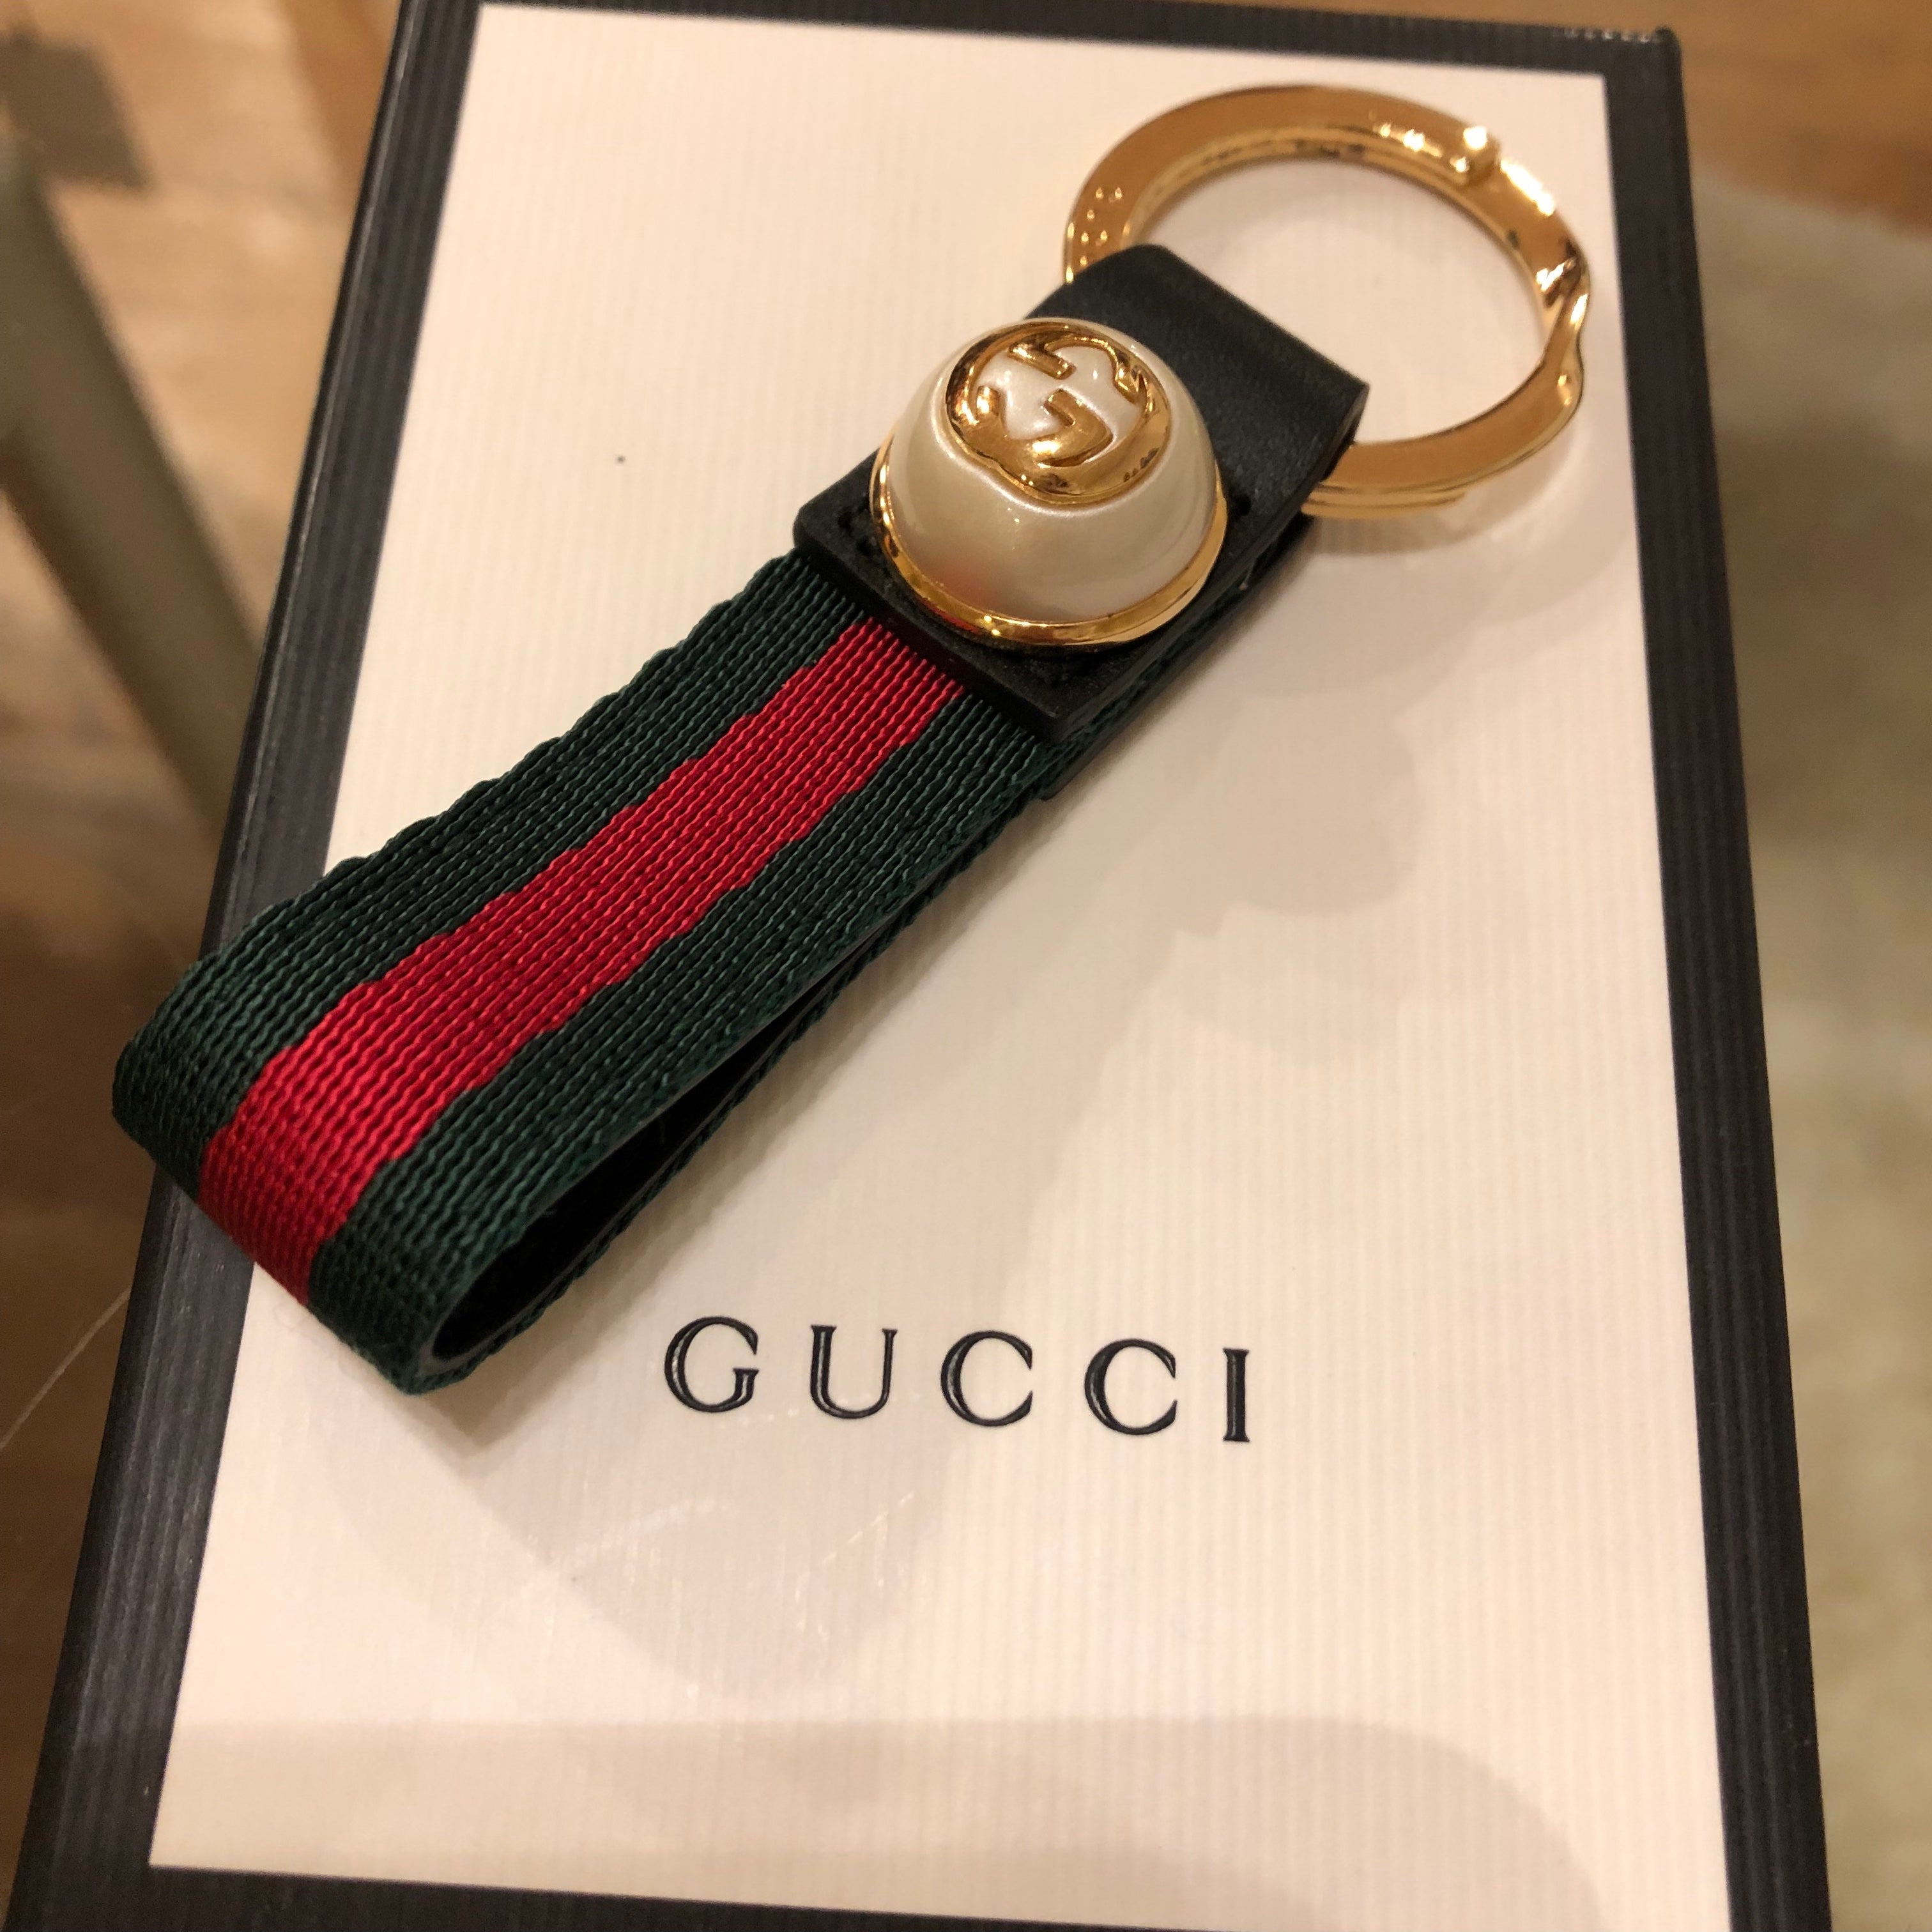 Gucci Green and Red Web Nylon Key Ring – 